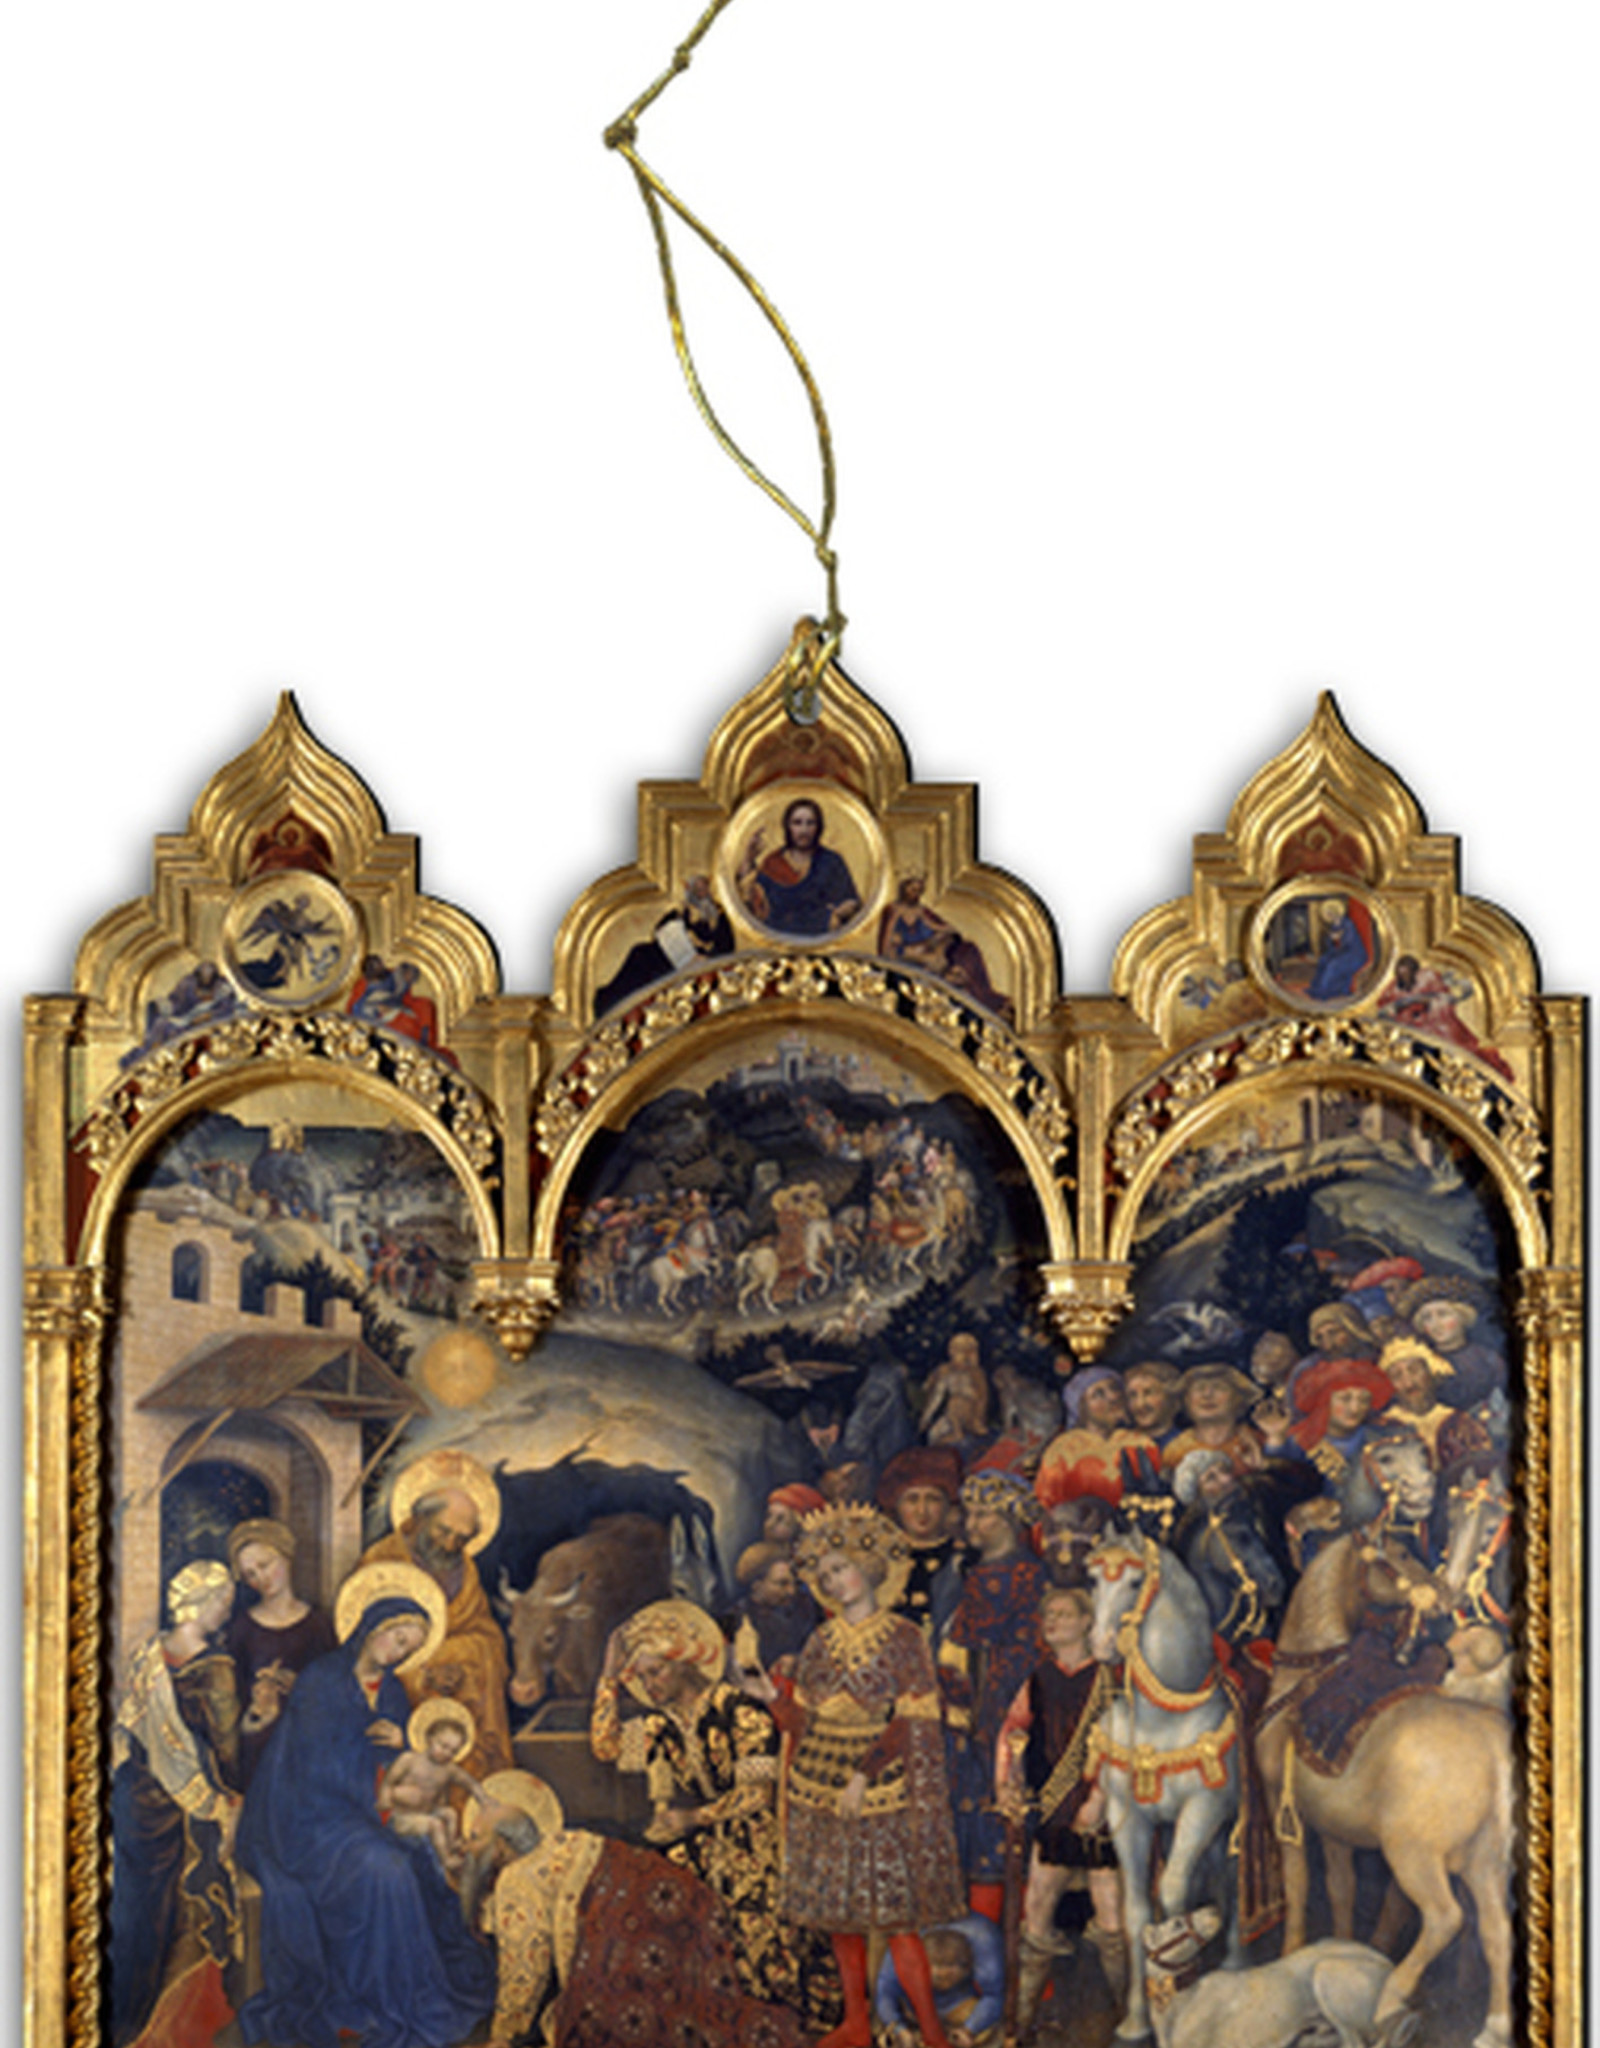 Ornament - Adoration of the Magi Triptych Wood